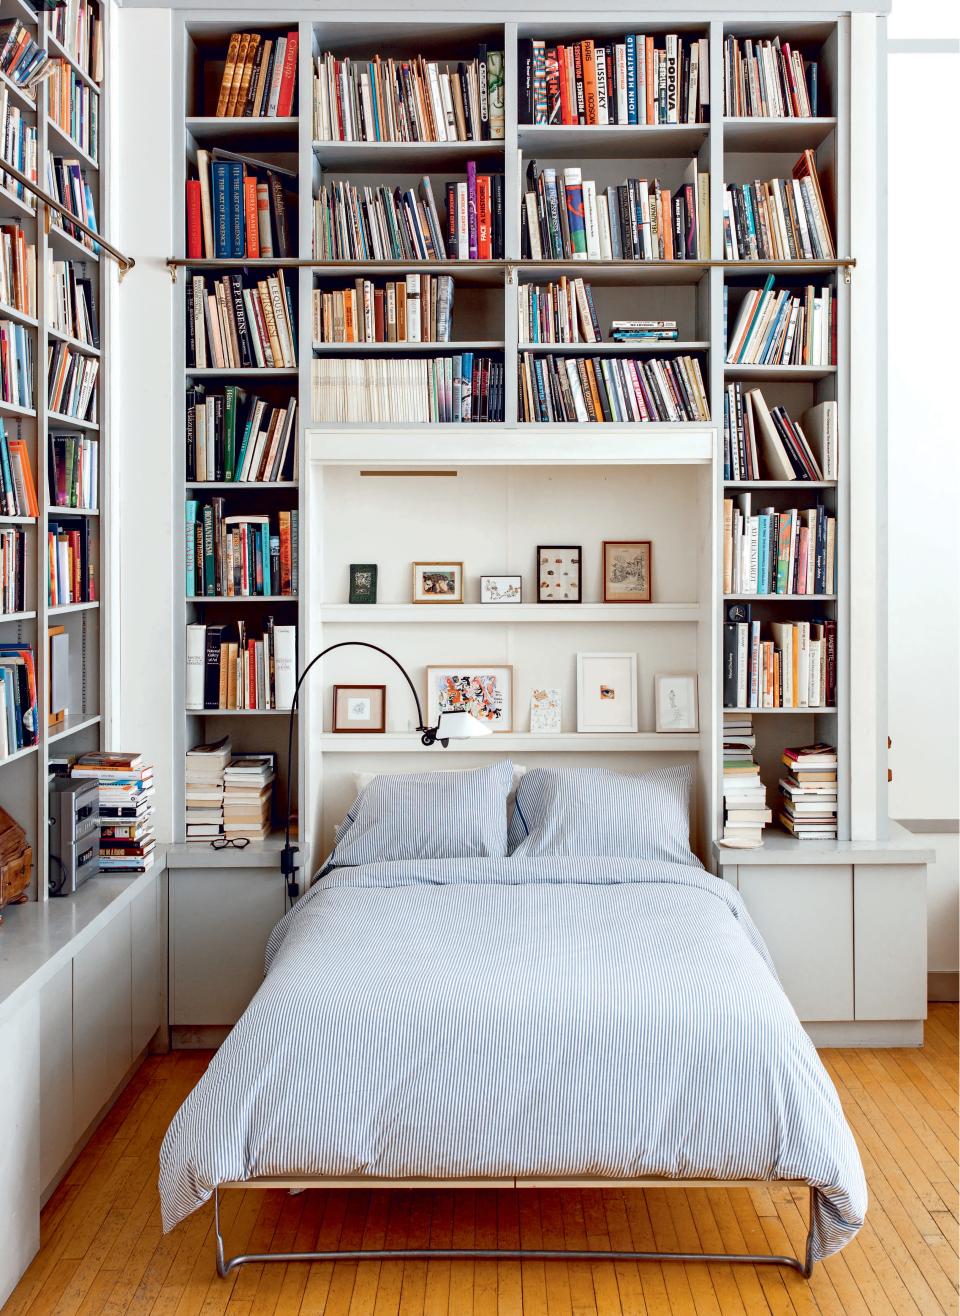 Keep the rest of the room minimal so floor-to-ceiling books can shine. Illustrator Joana Avillez sleeps surrounded by books in her own personal library.